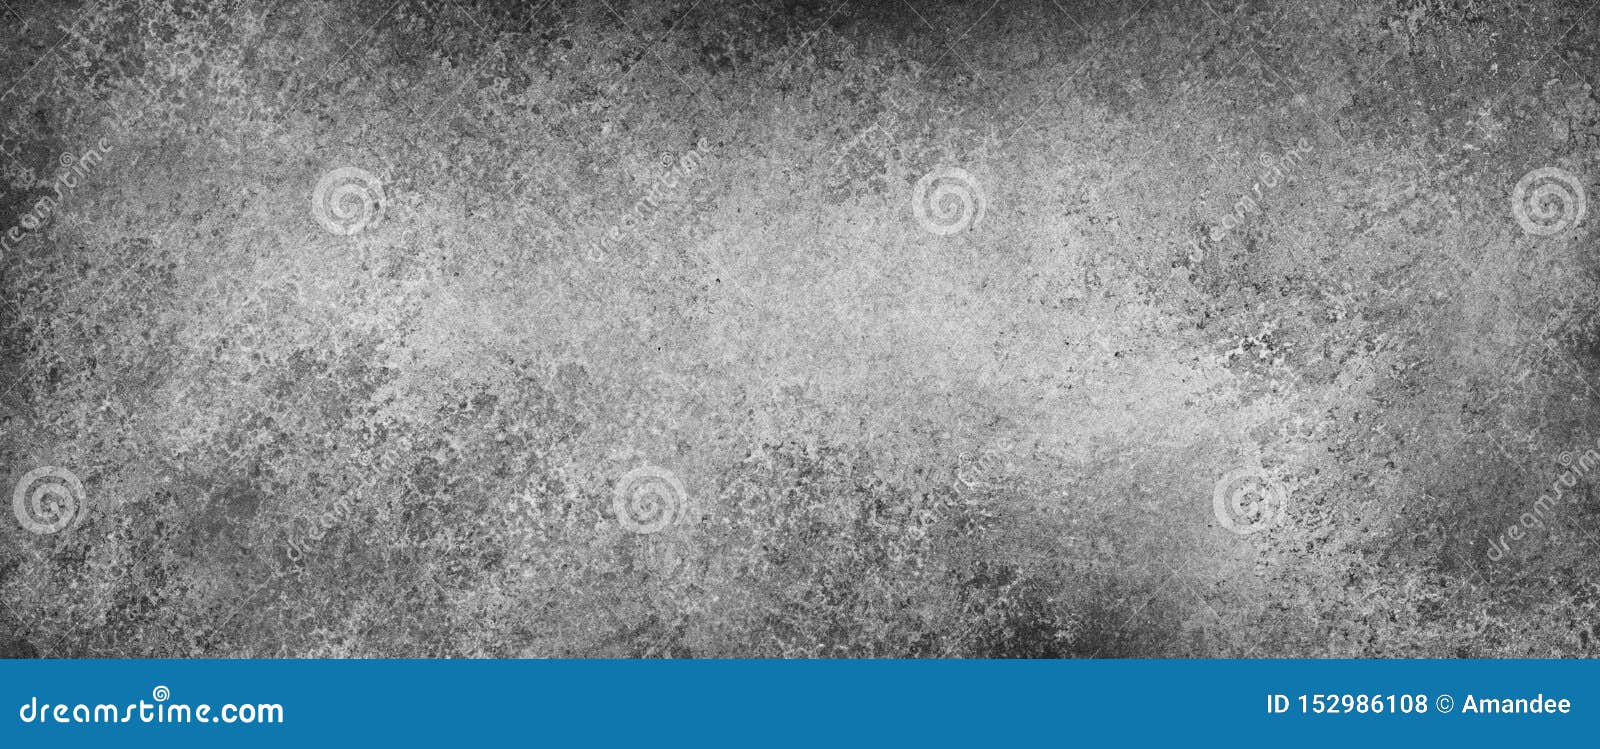 old grunge texture in black and white background banner, dirty distressed dark grungy borders and light gray cente